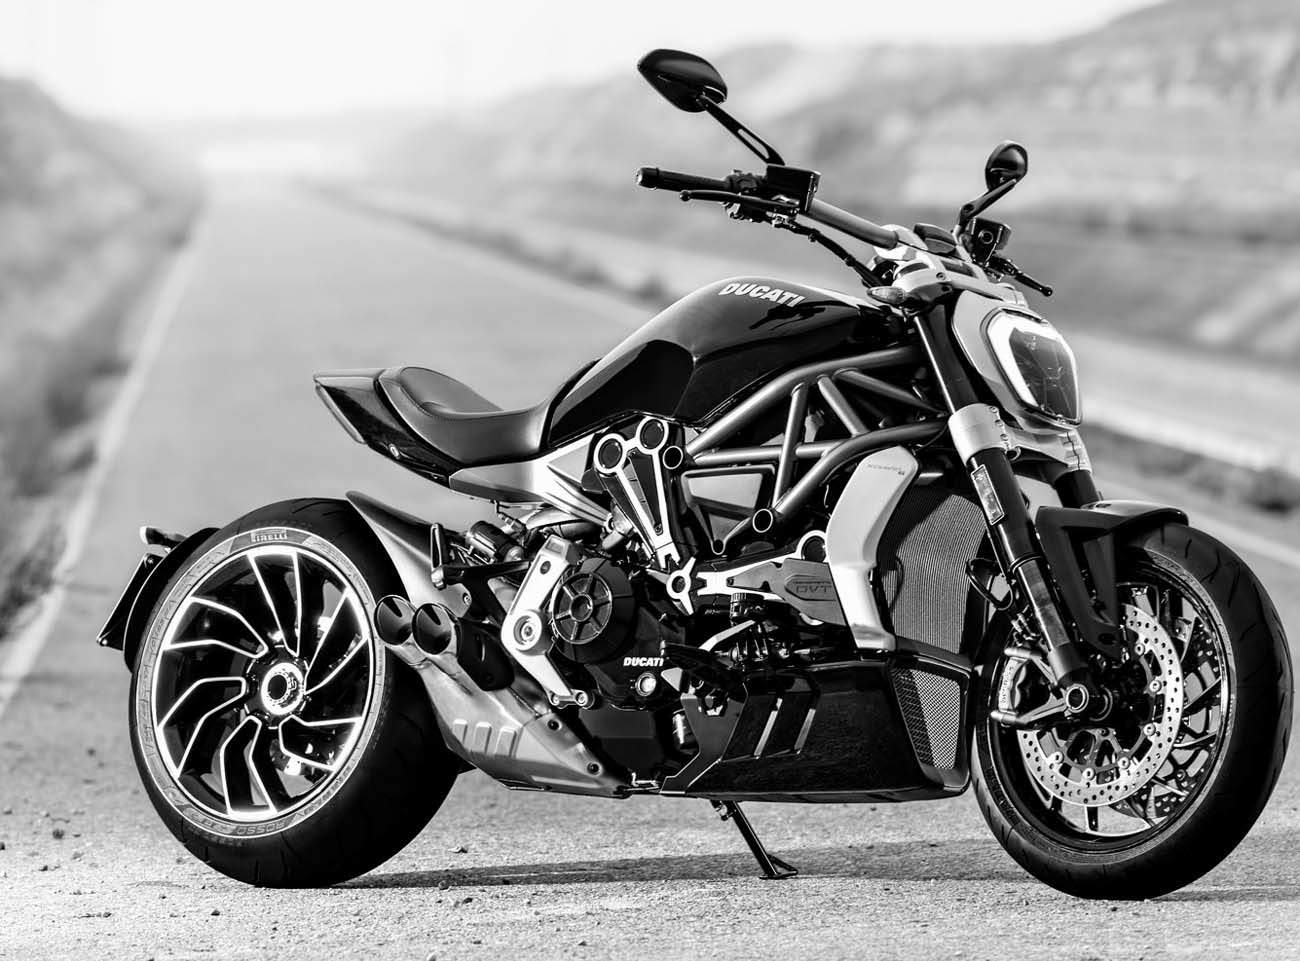 Ducati XDiavel S technical specifications